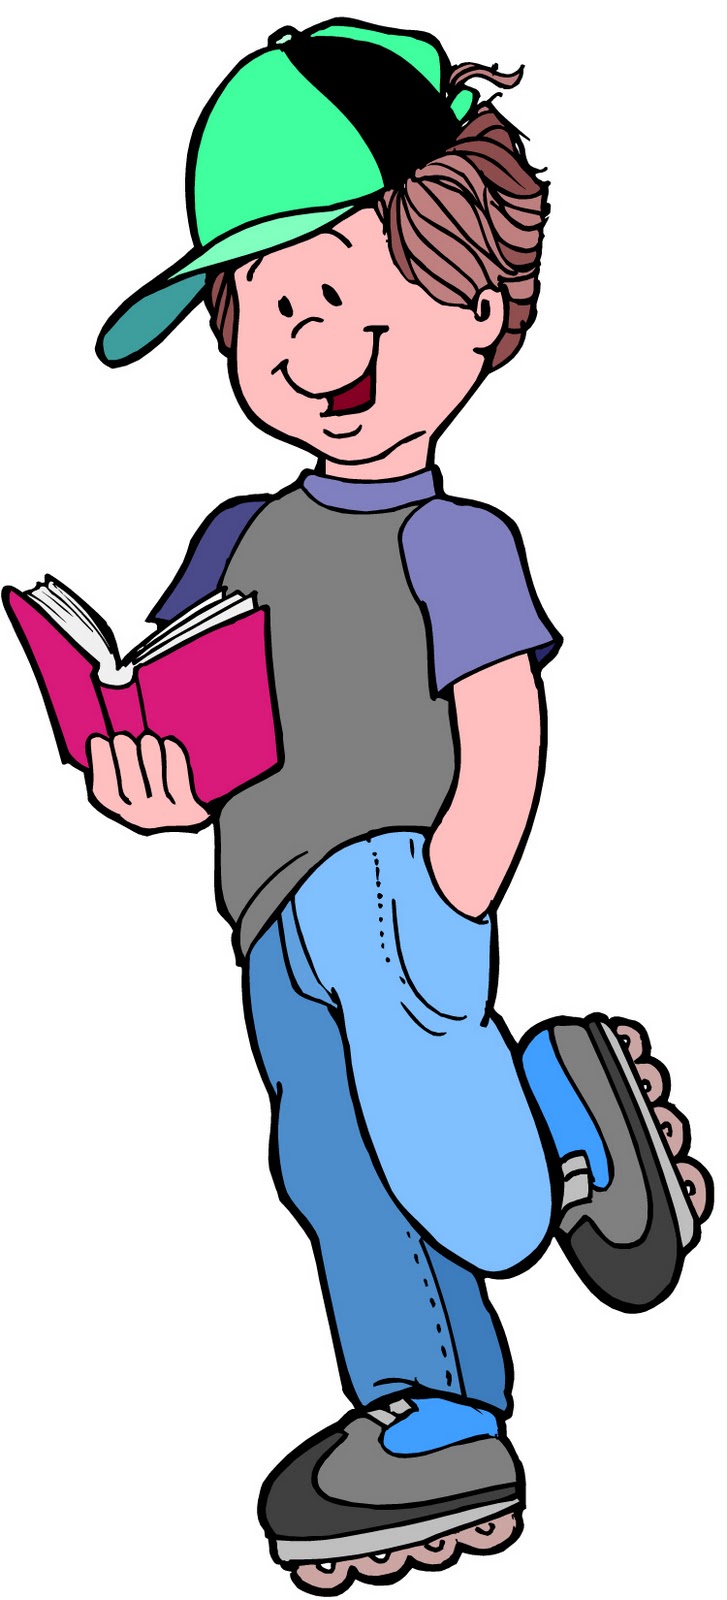 Child thinking child reading and thinking clipart